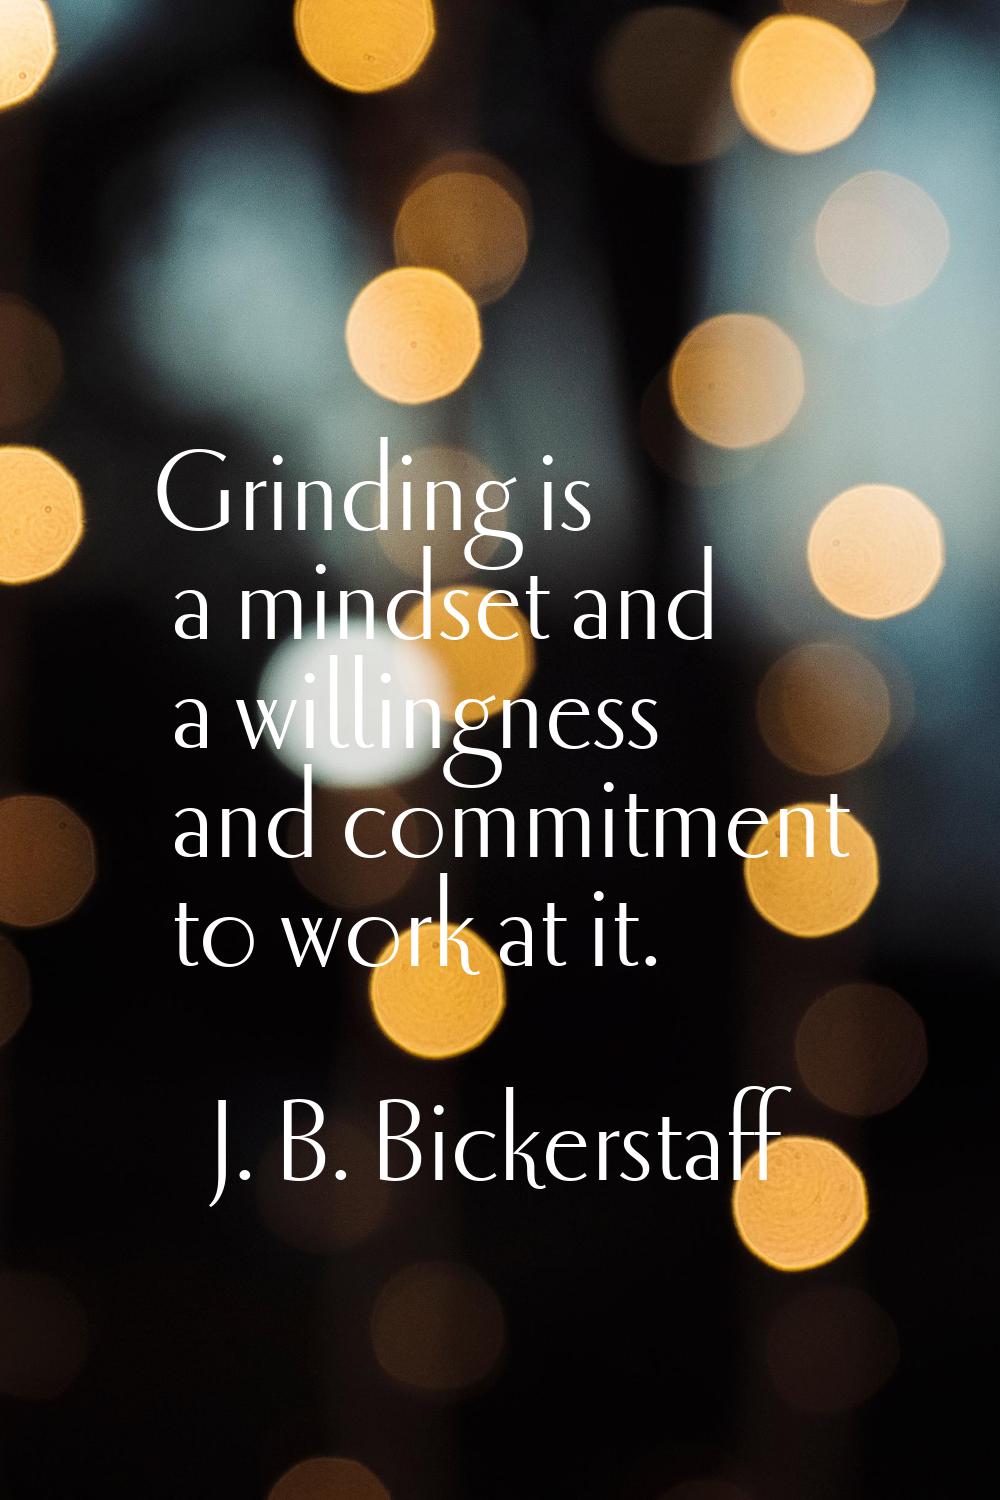 Grinding is a mindset and a willingness and commitment to work at it.